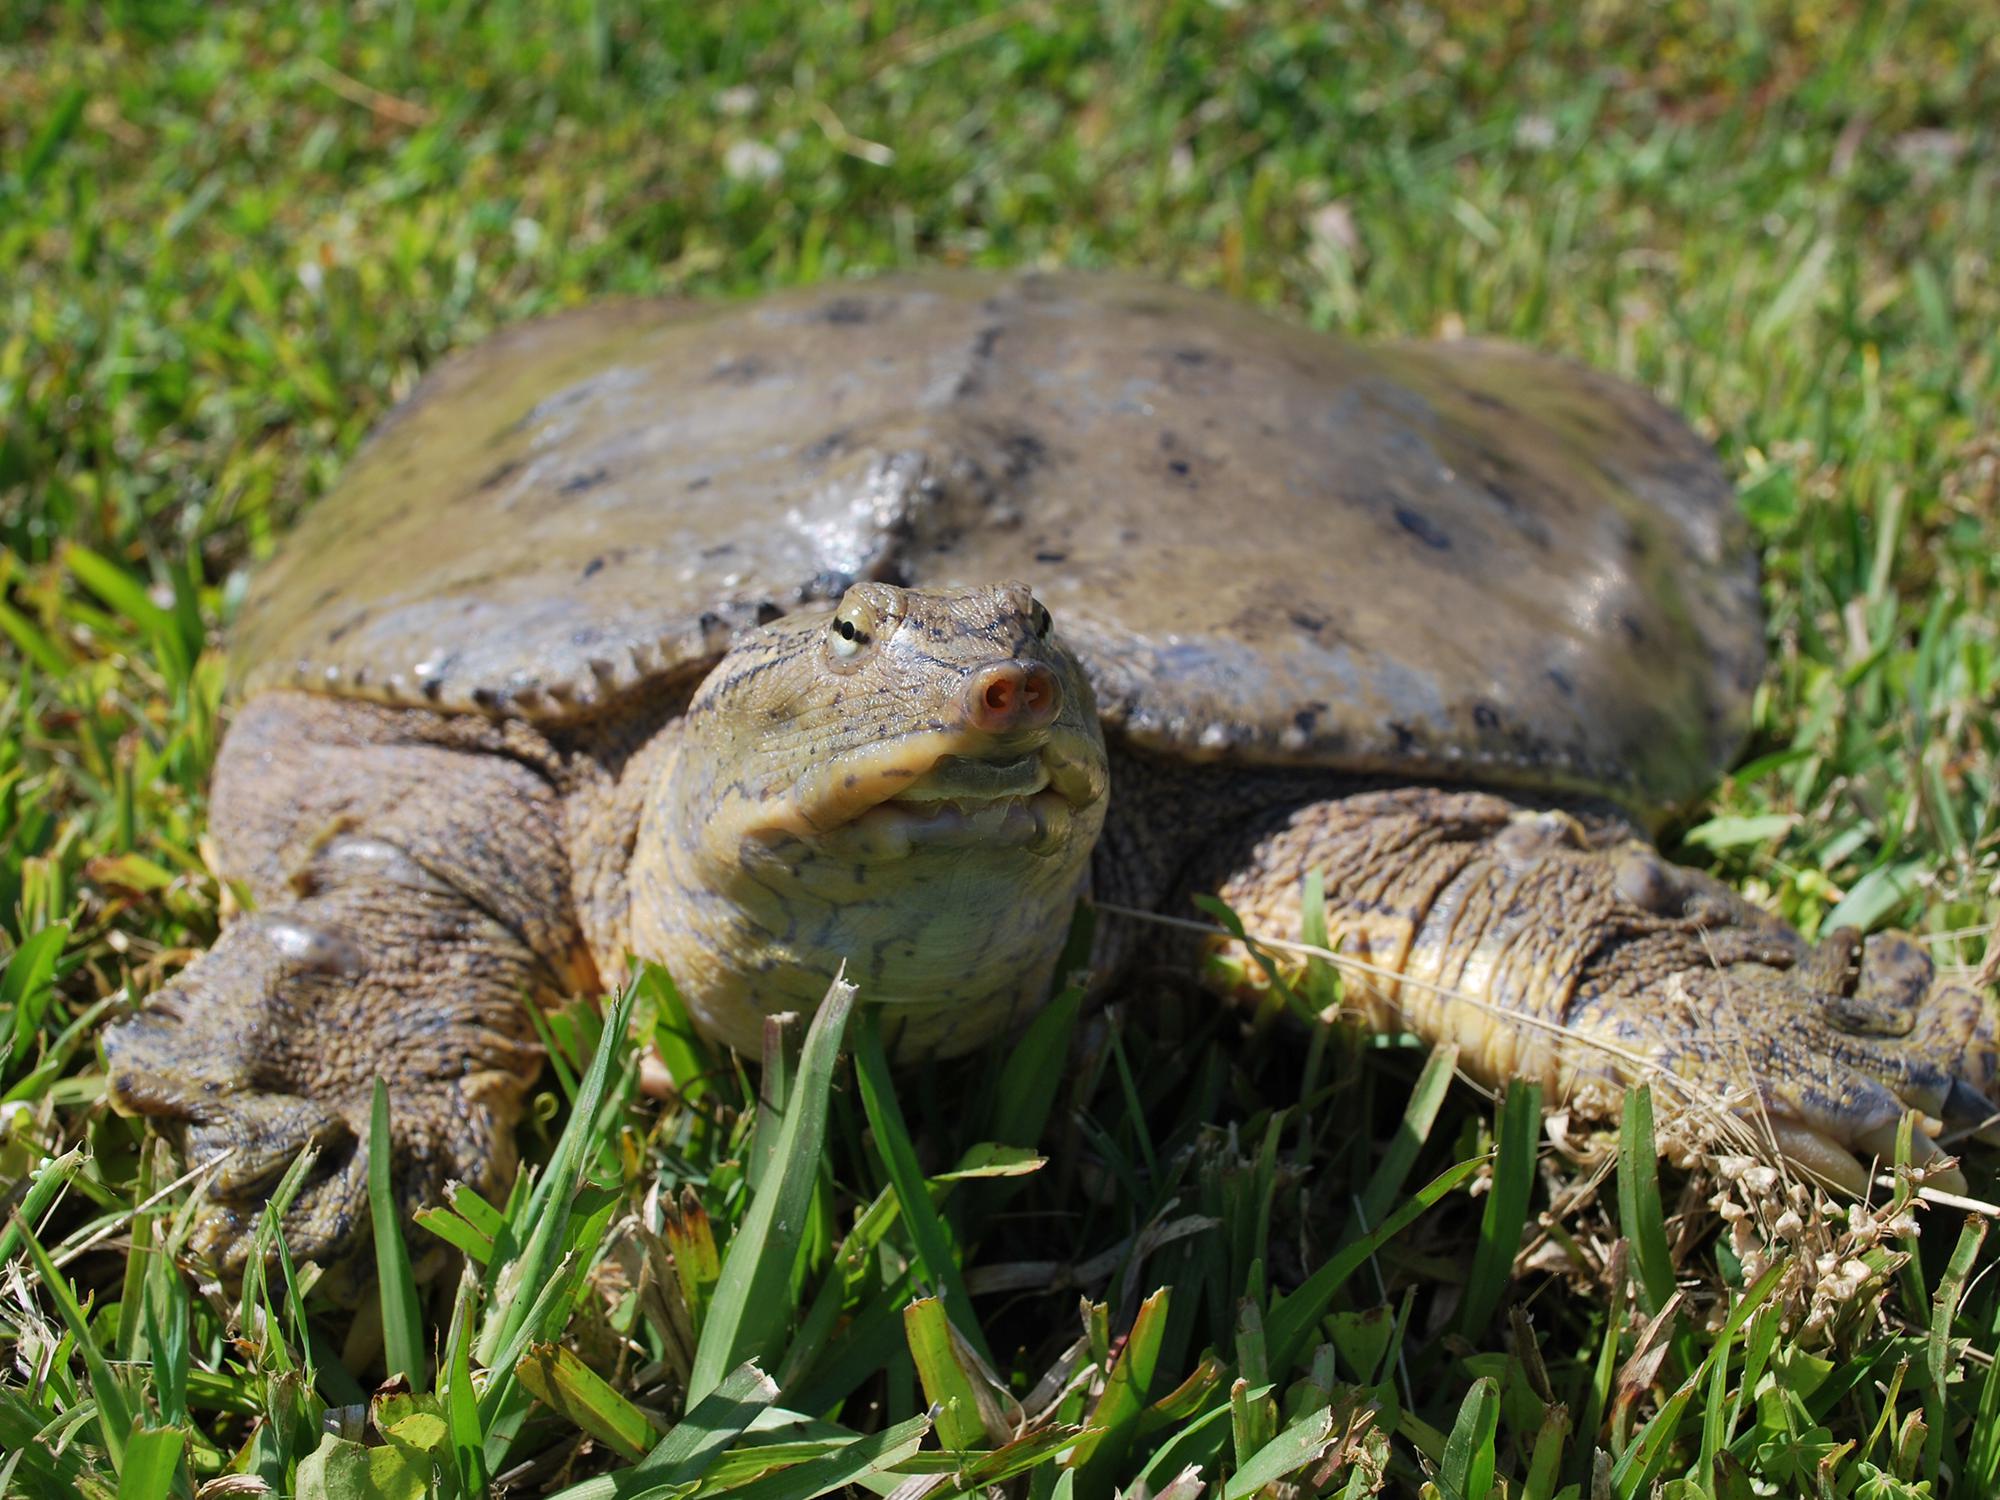 Turtles pose no major threat to fish populations in ponds. In fact, they have a beneficial effect on water quality by scavenging for dead animals and plants. (Photo by Evan O’Donnell/MSU Extension)